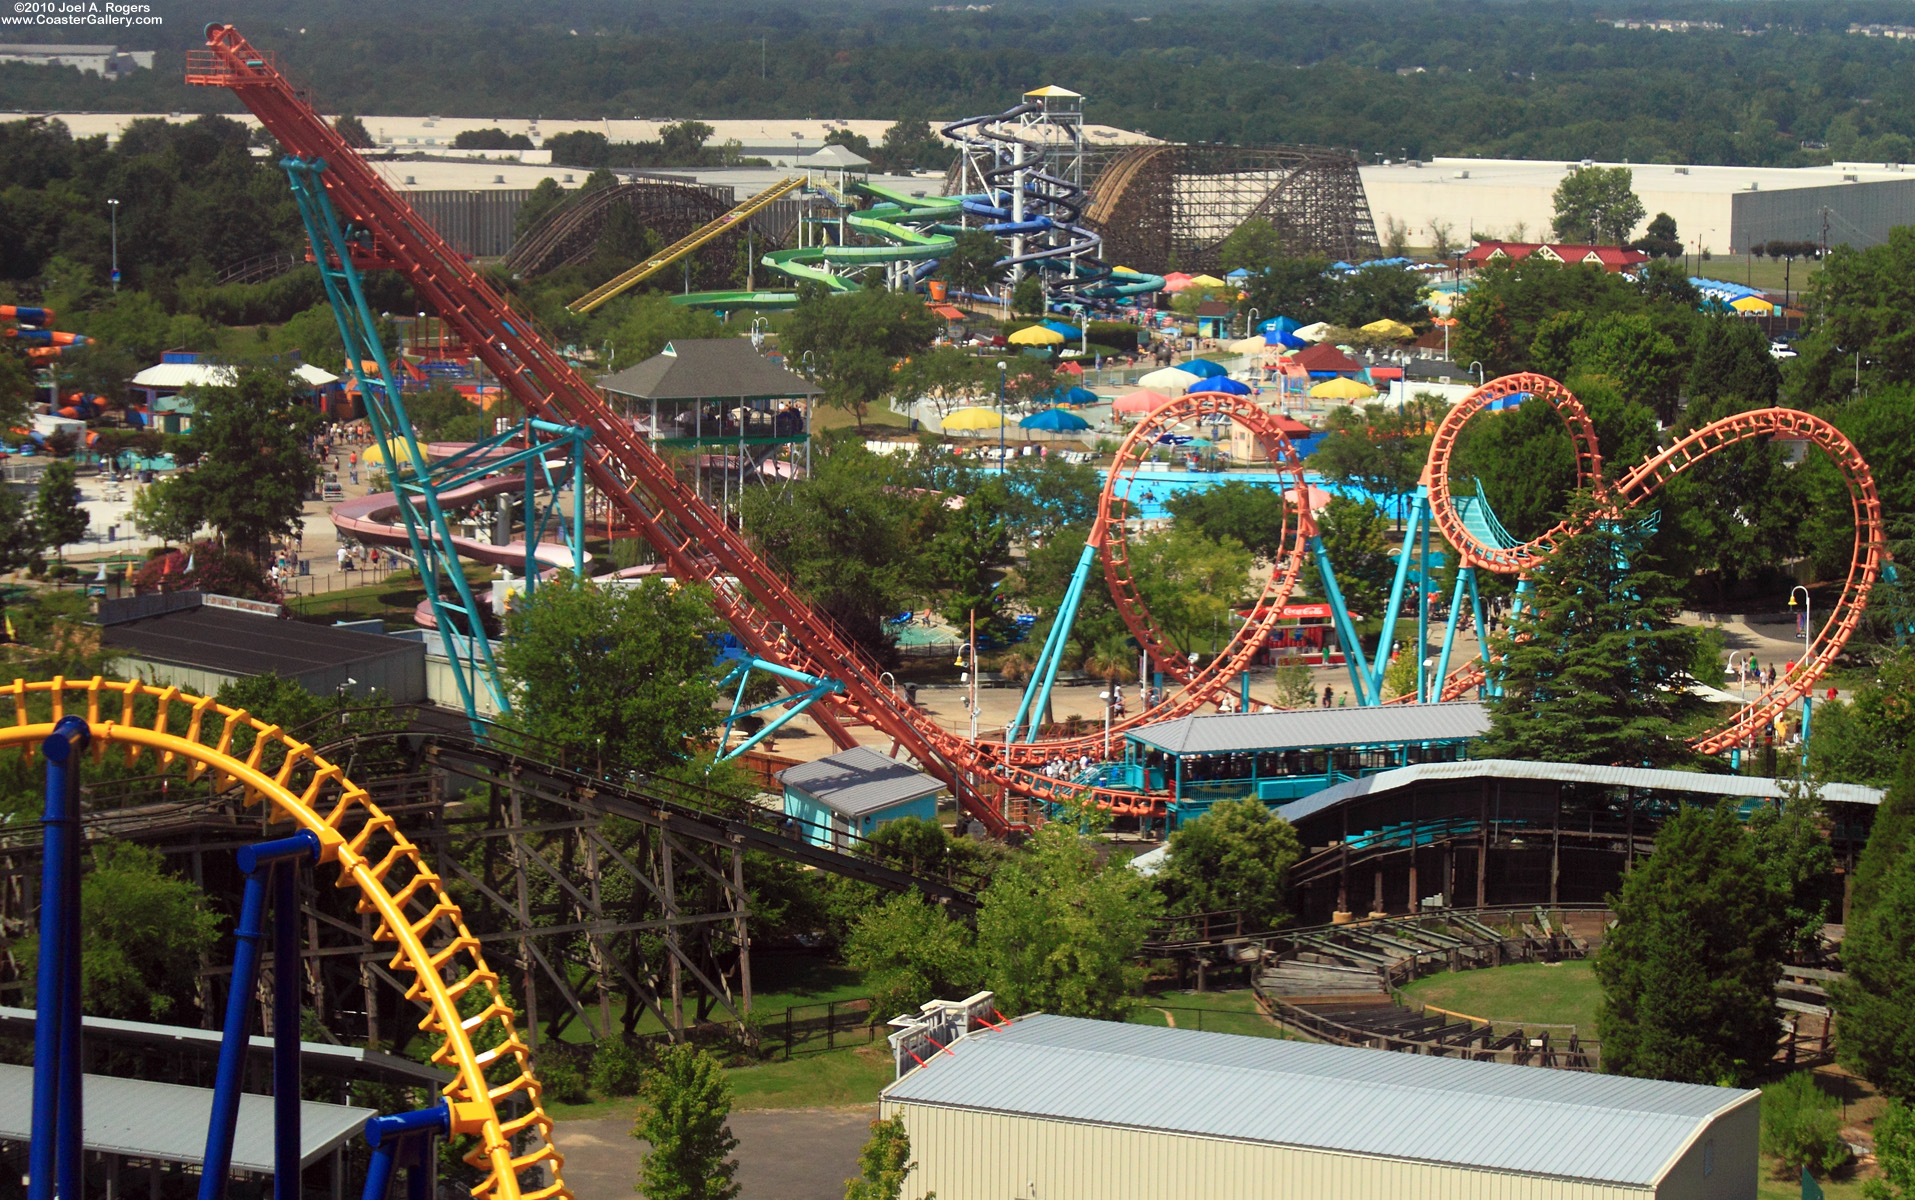 Looking down at Carowinds' roller coasters